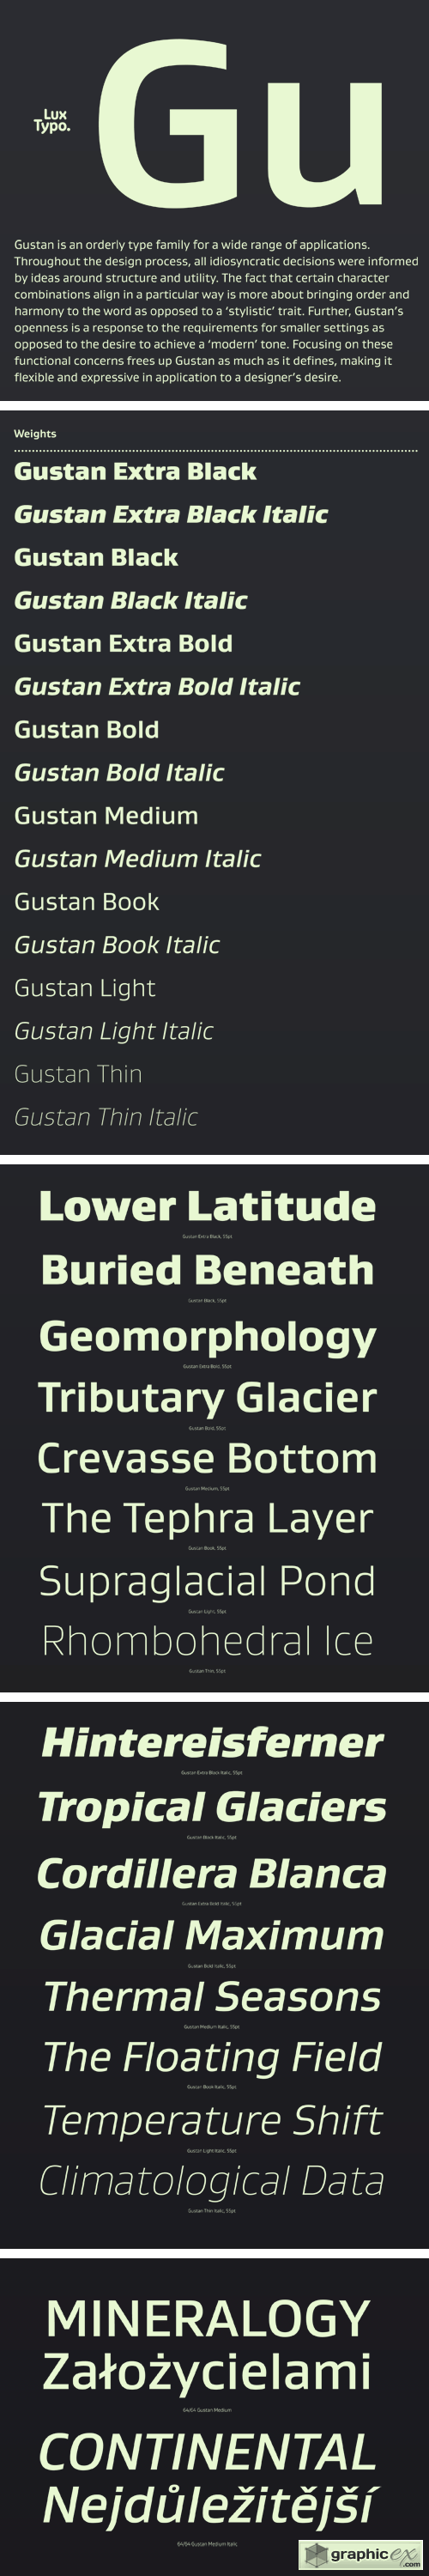 Gustan Font Family » Free Download Vector Stock Image Photoshop Icon